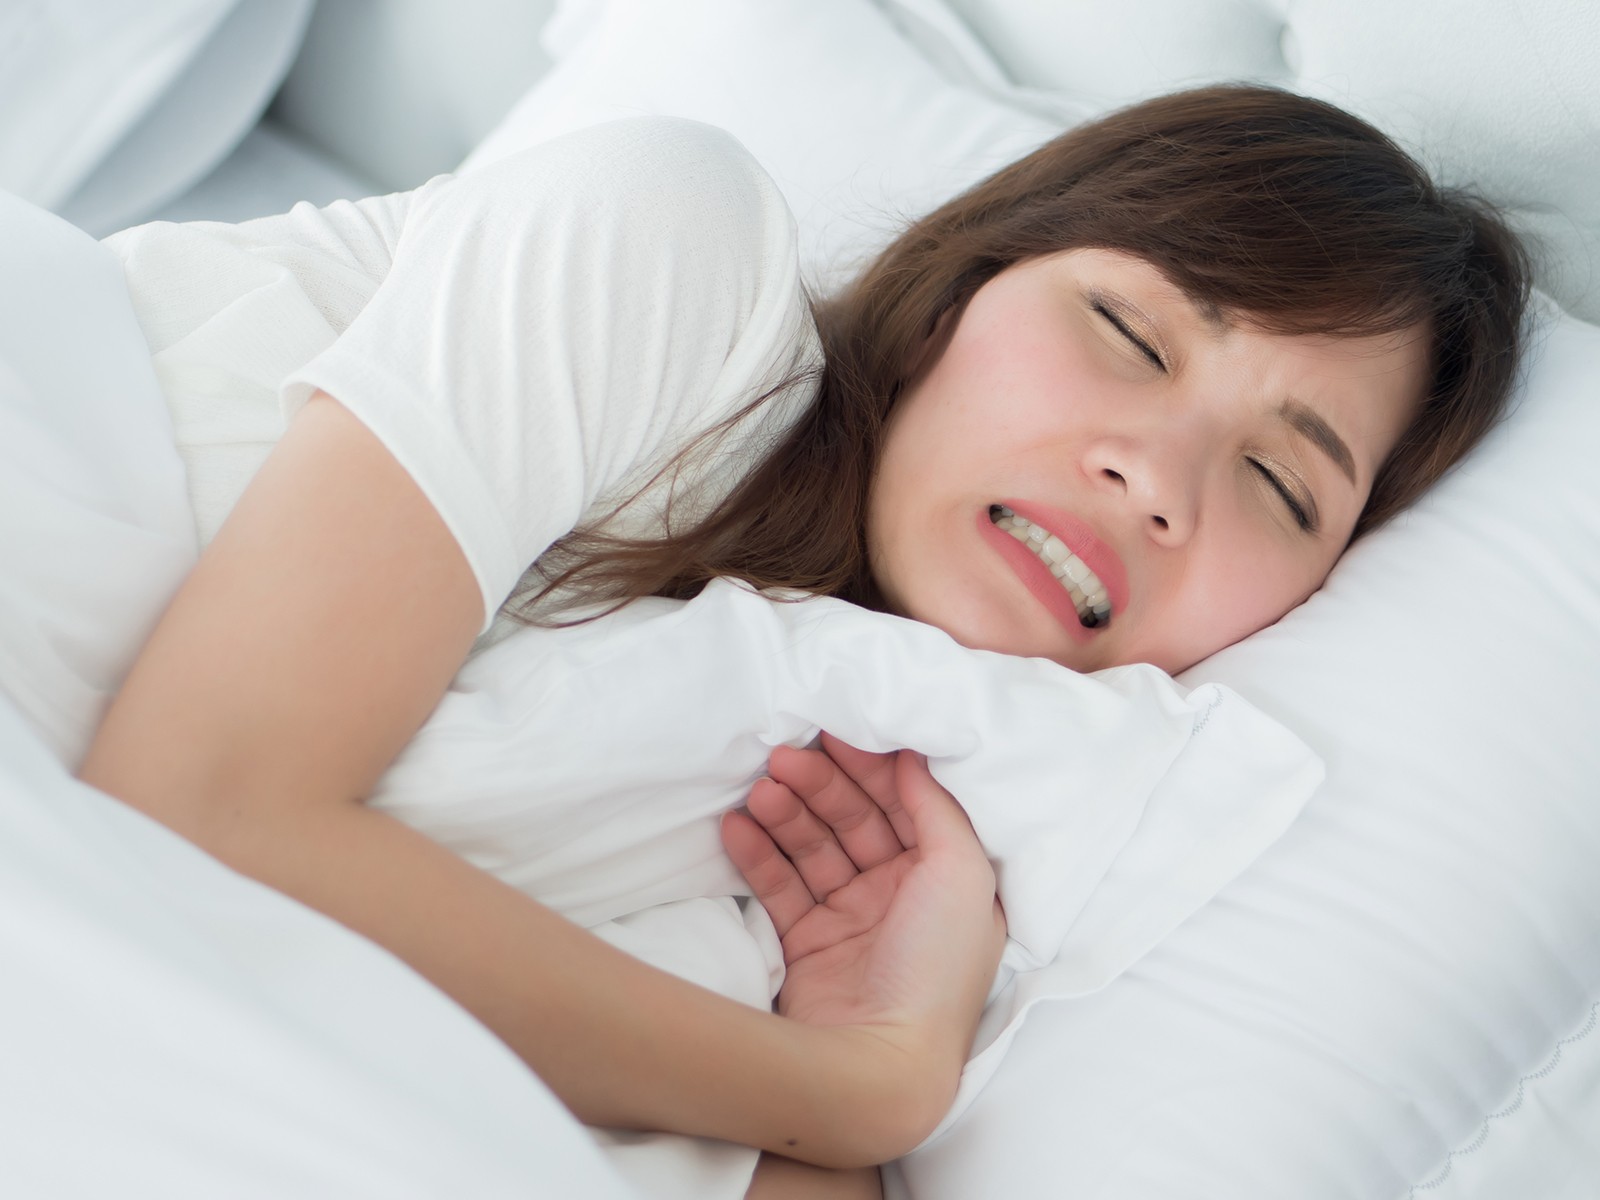 How to manage sleep bruxism in children?